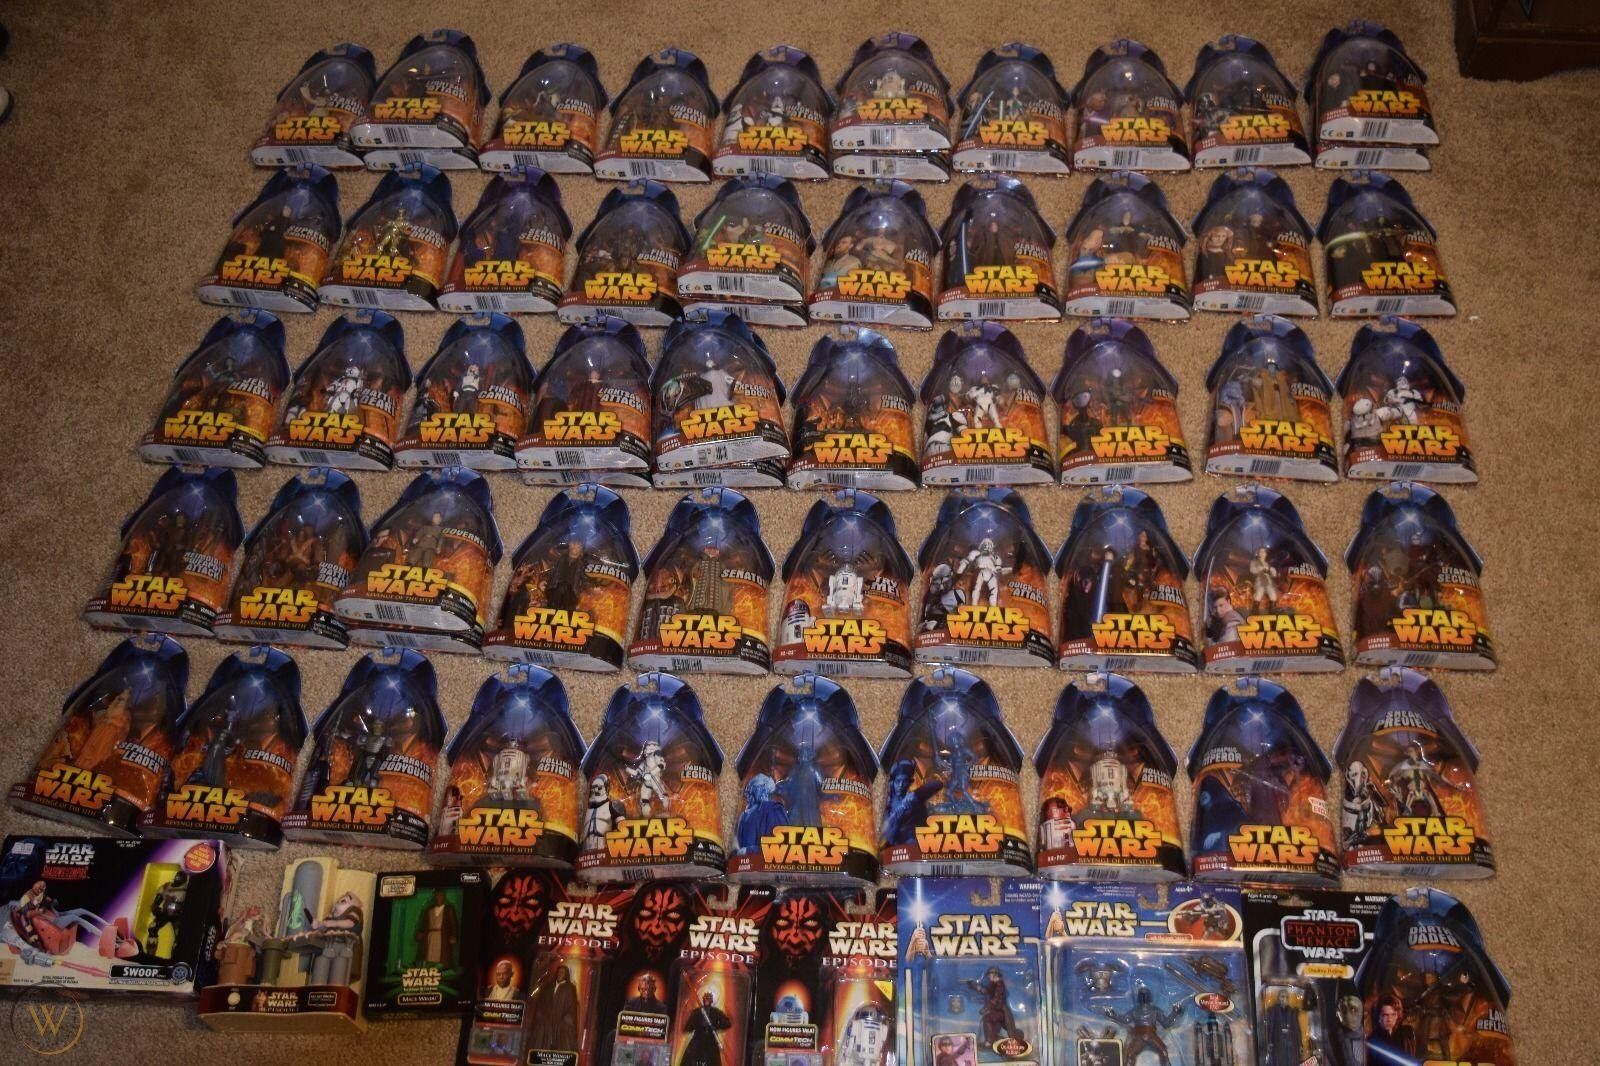 Large Star Wars collection